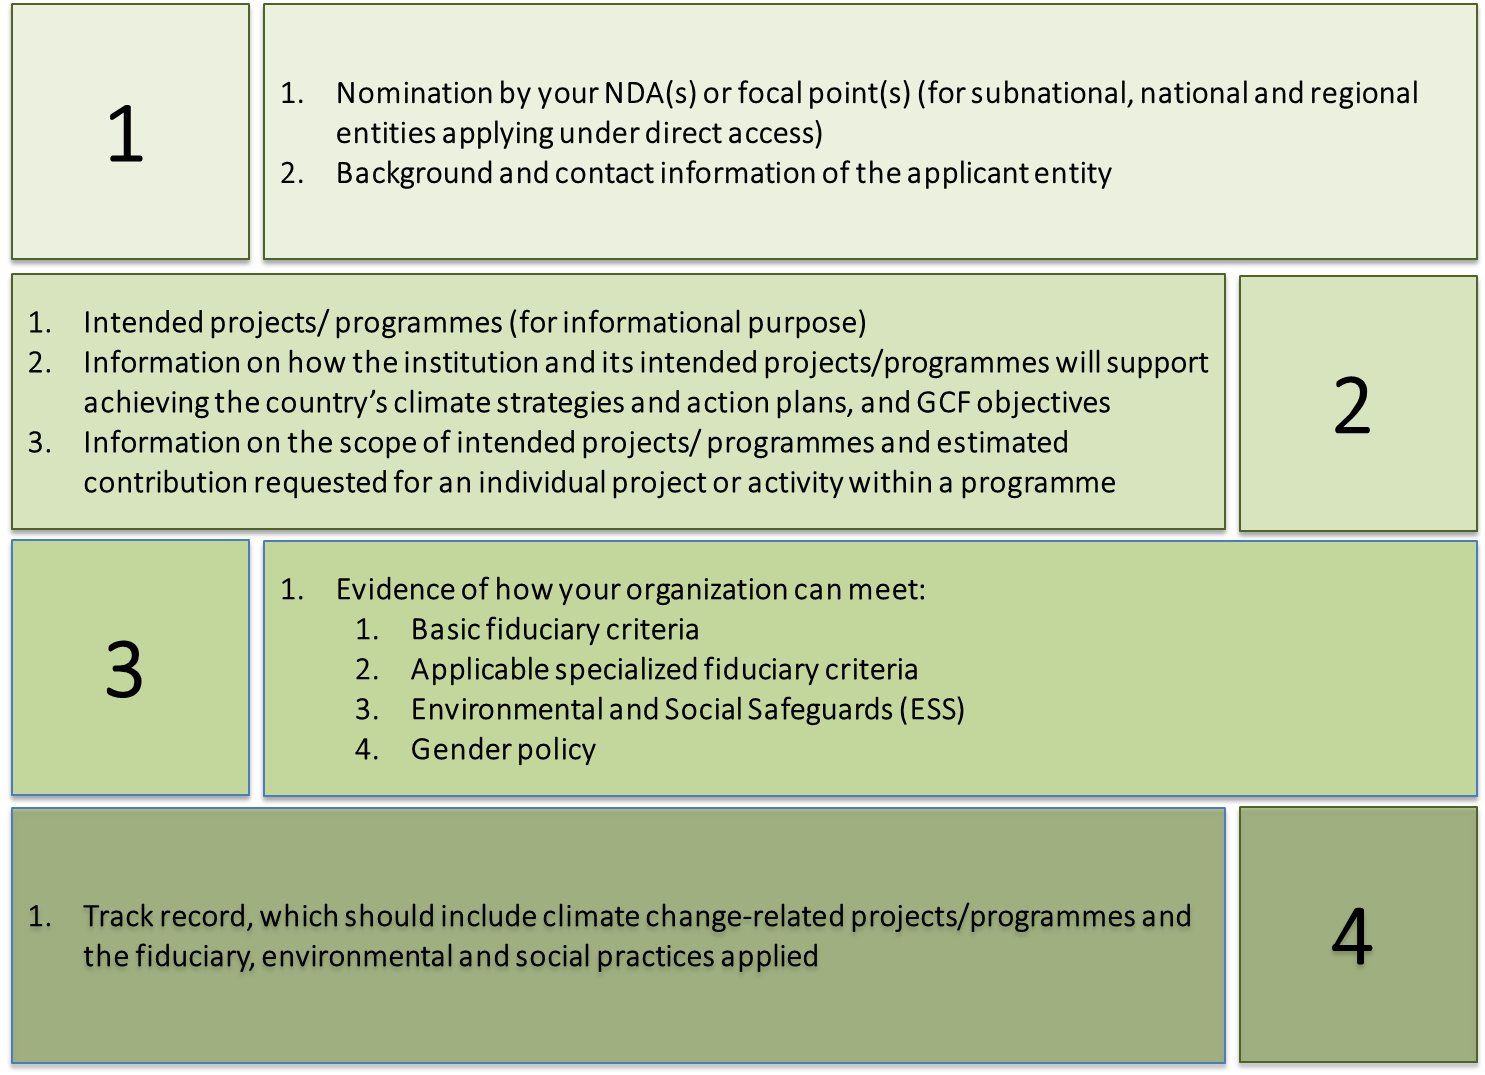 Accreditation Application Requirements for the Green Climate Fund (found in Grenada’s National Designated Authority’s
Toolkit for Engaging with the Green Climate Fund)